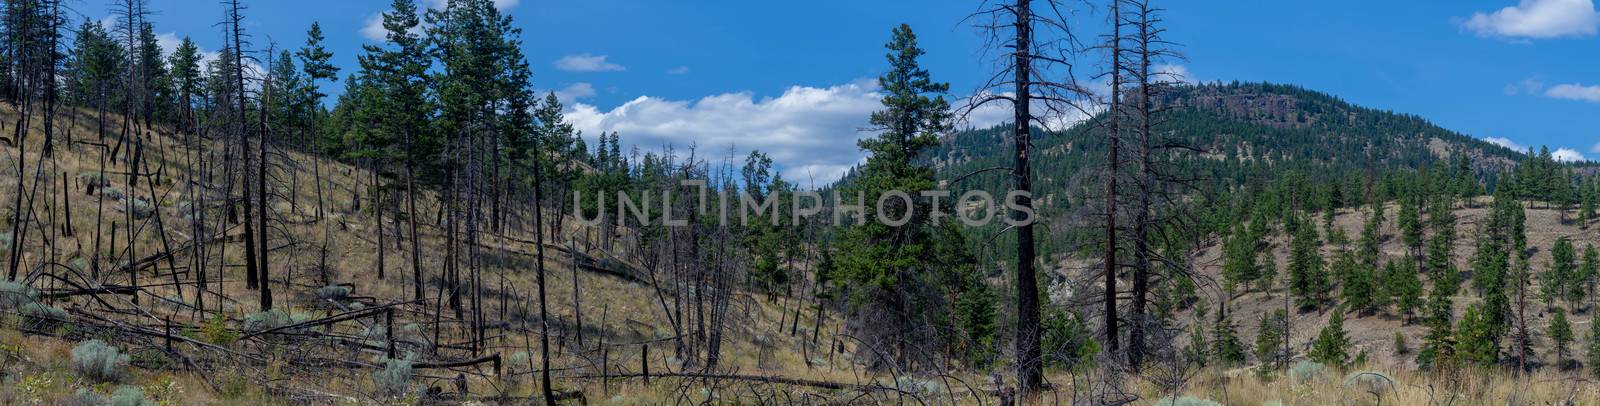 Panorama of Okanogan Lake mountains in Kelowna, British Columbia, Canada on a sunny day looking at burned forest, dry ground and the lake.